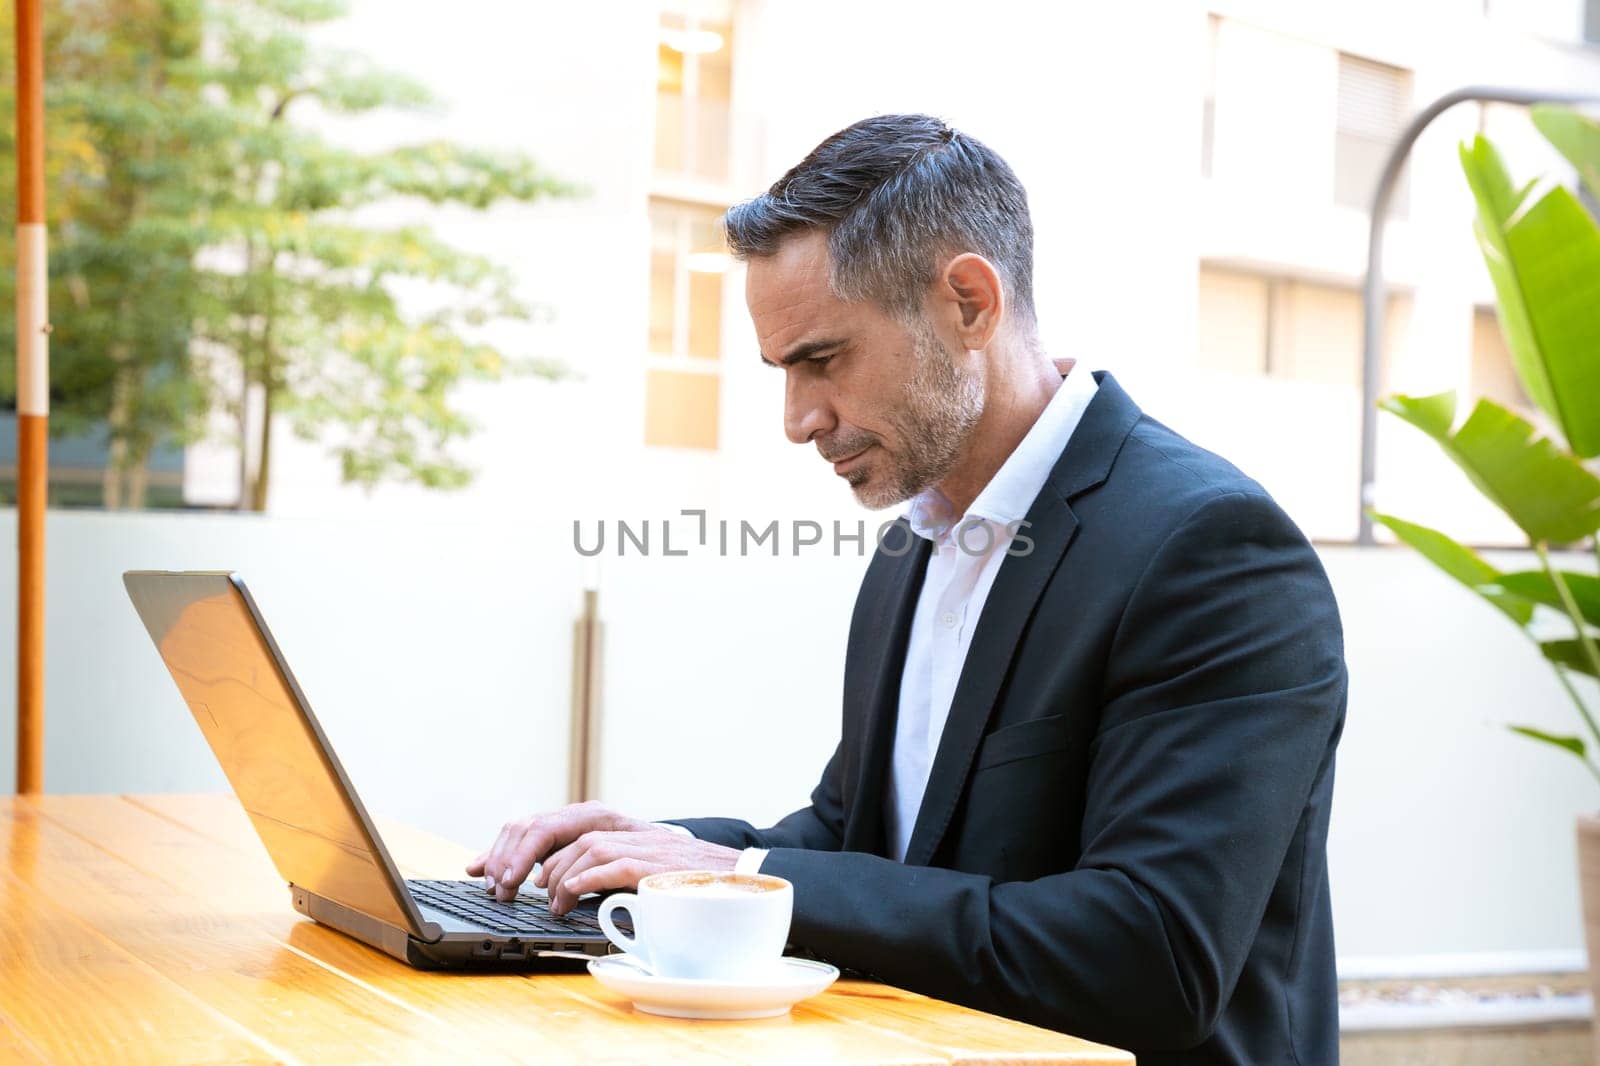 Business on the move: Businessman working on his laptop on the street. Man Hands Type On His Laptop Outdoors